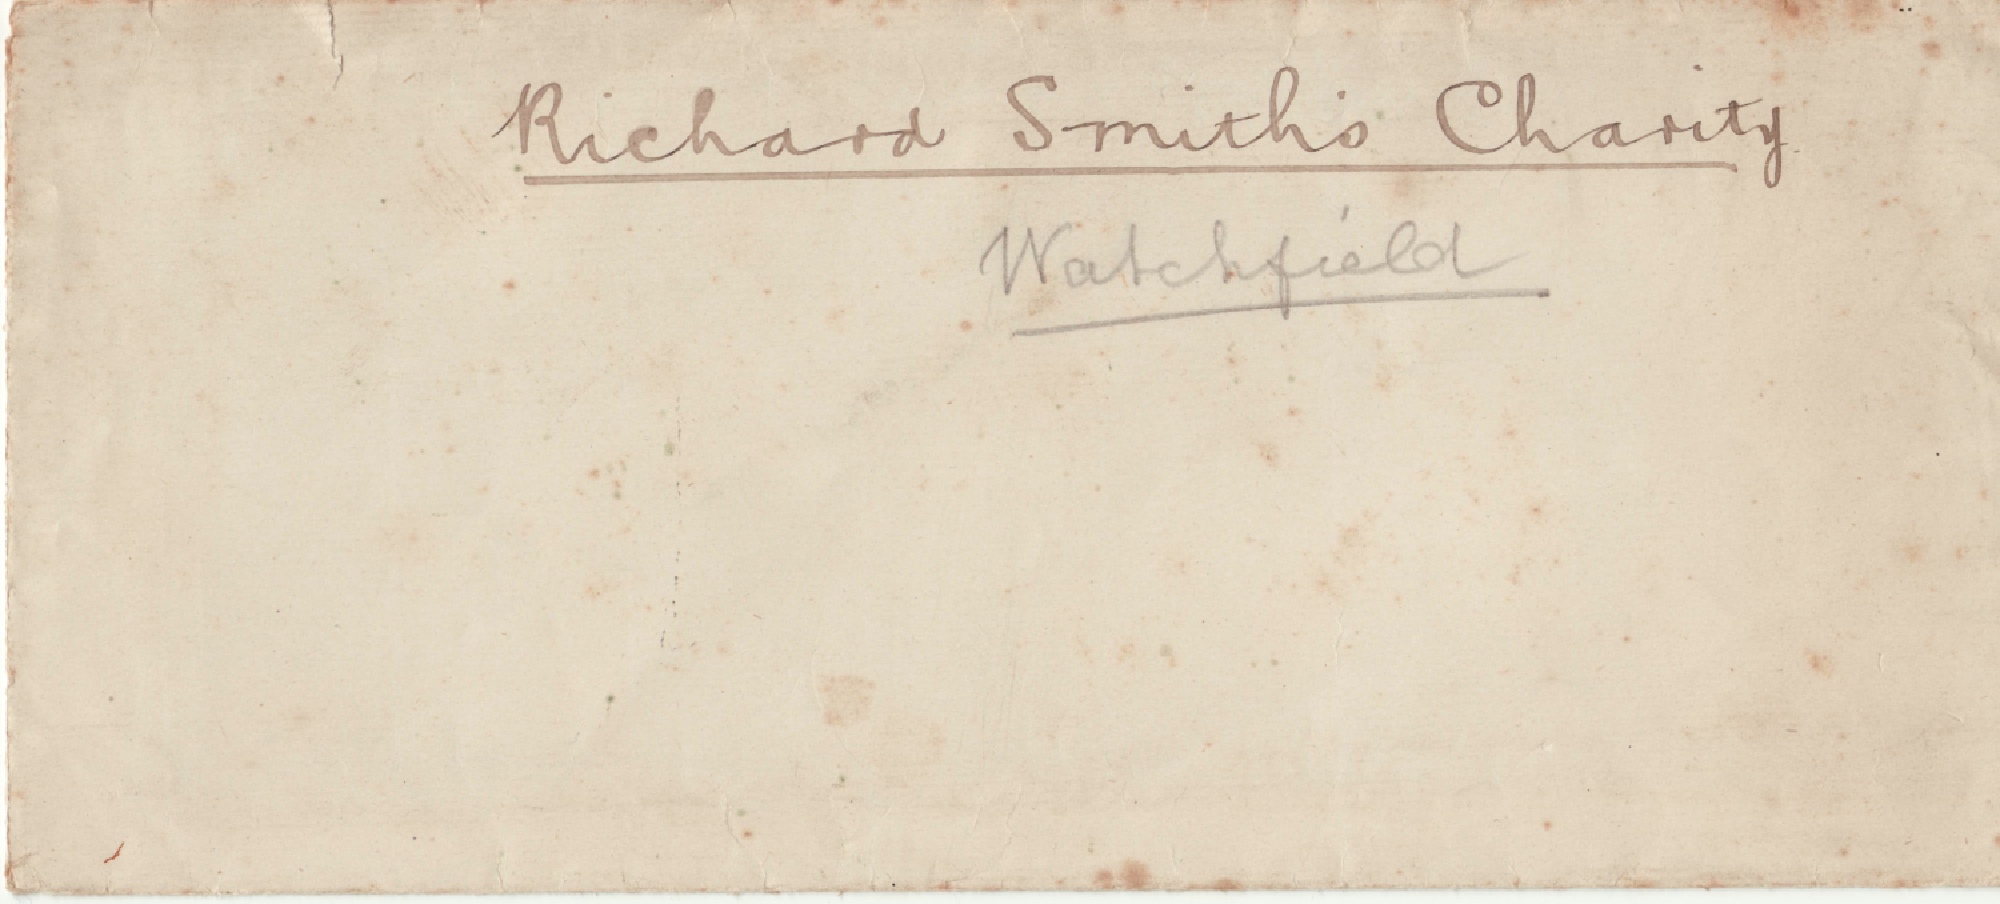 Early envelope but not post marked